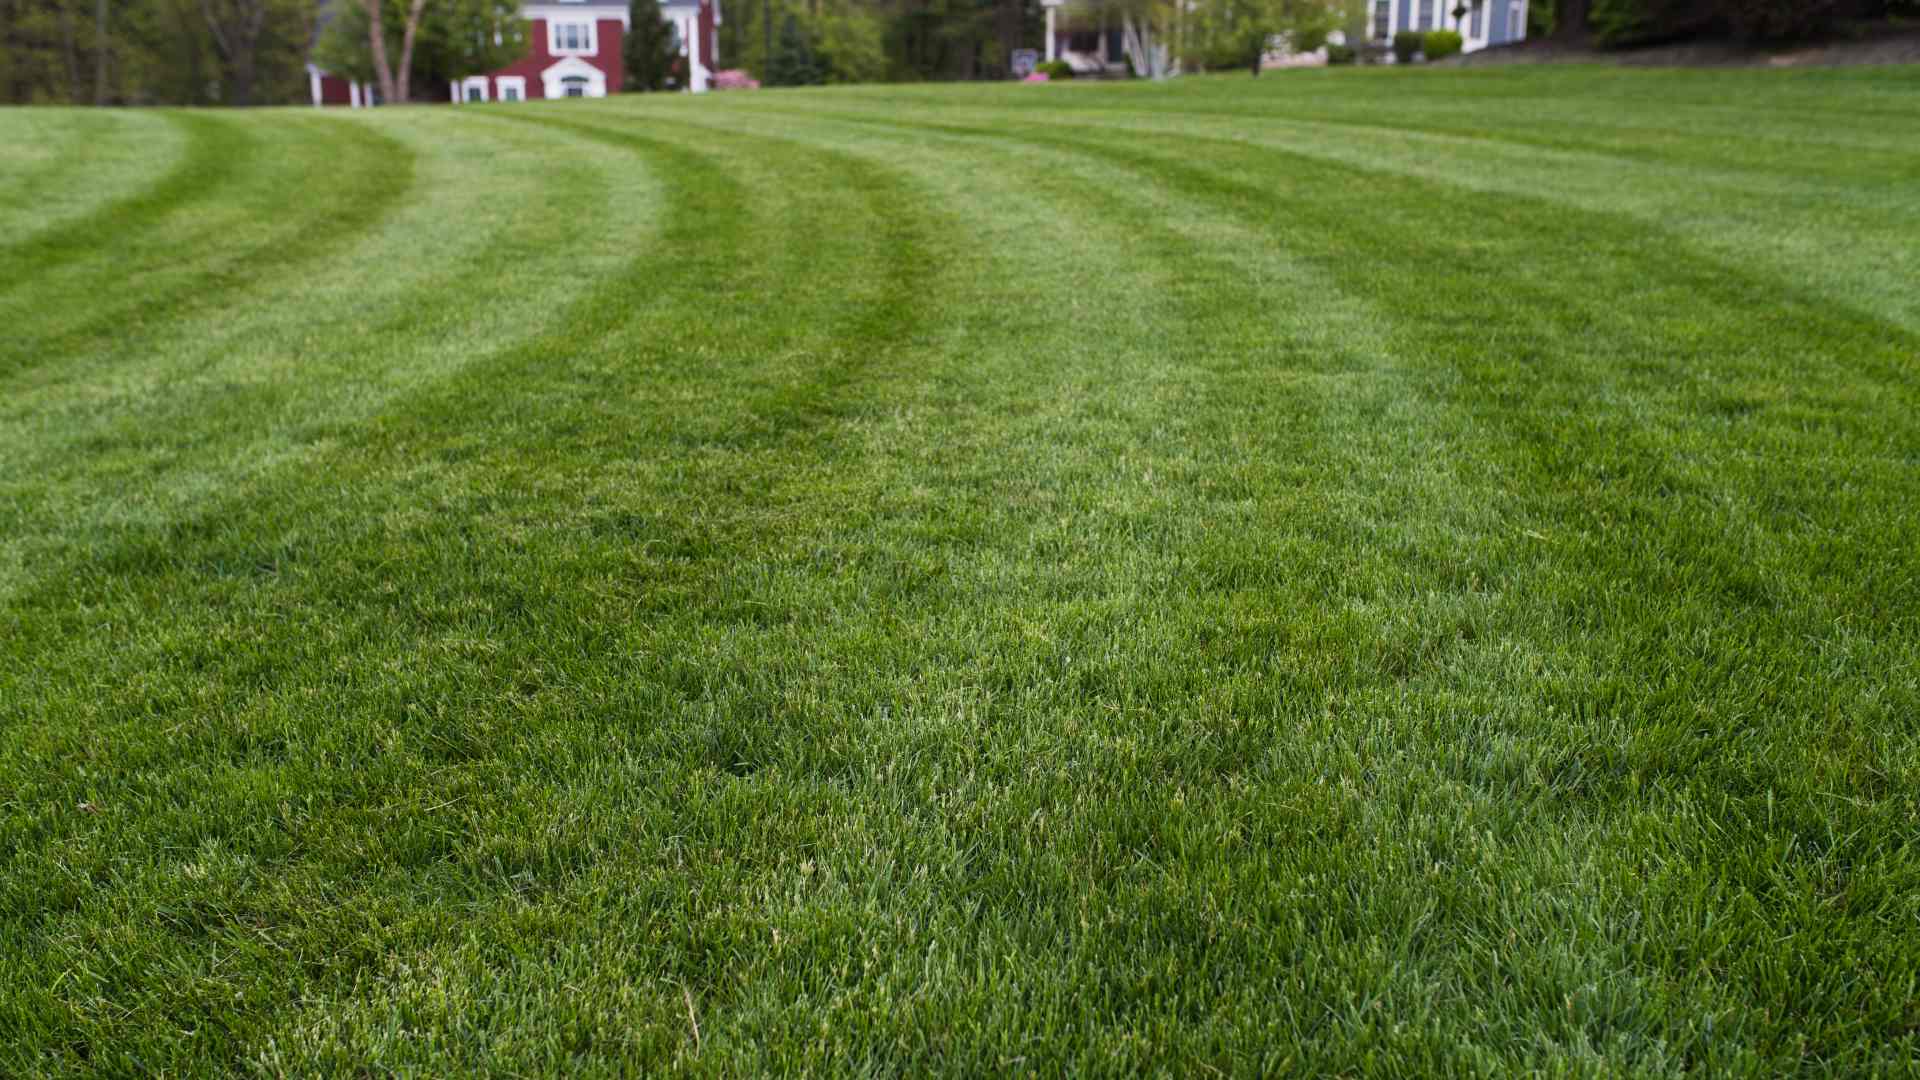 The Most Important Things to Consider When Hiring a Lawn Mowing Company